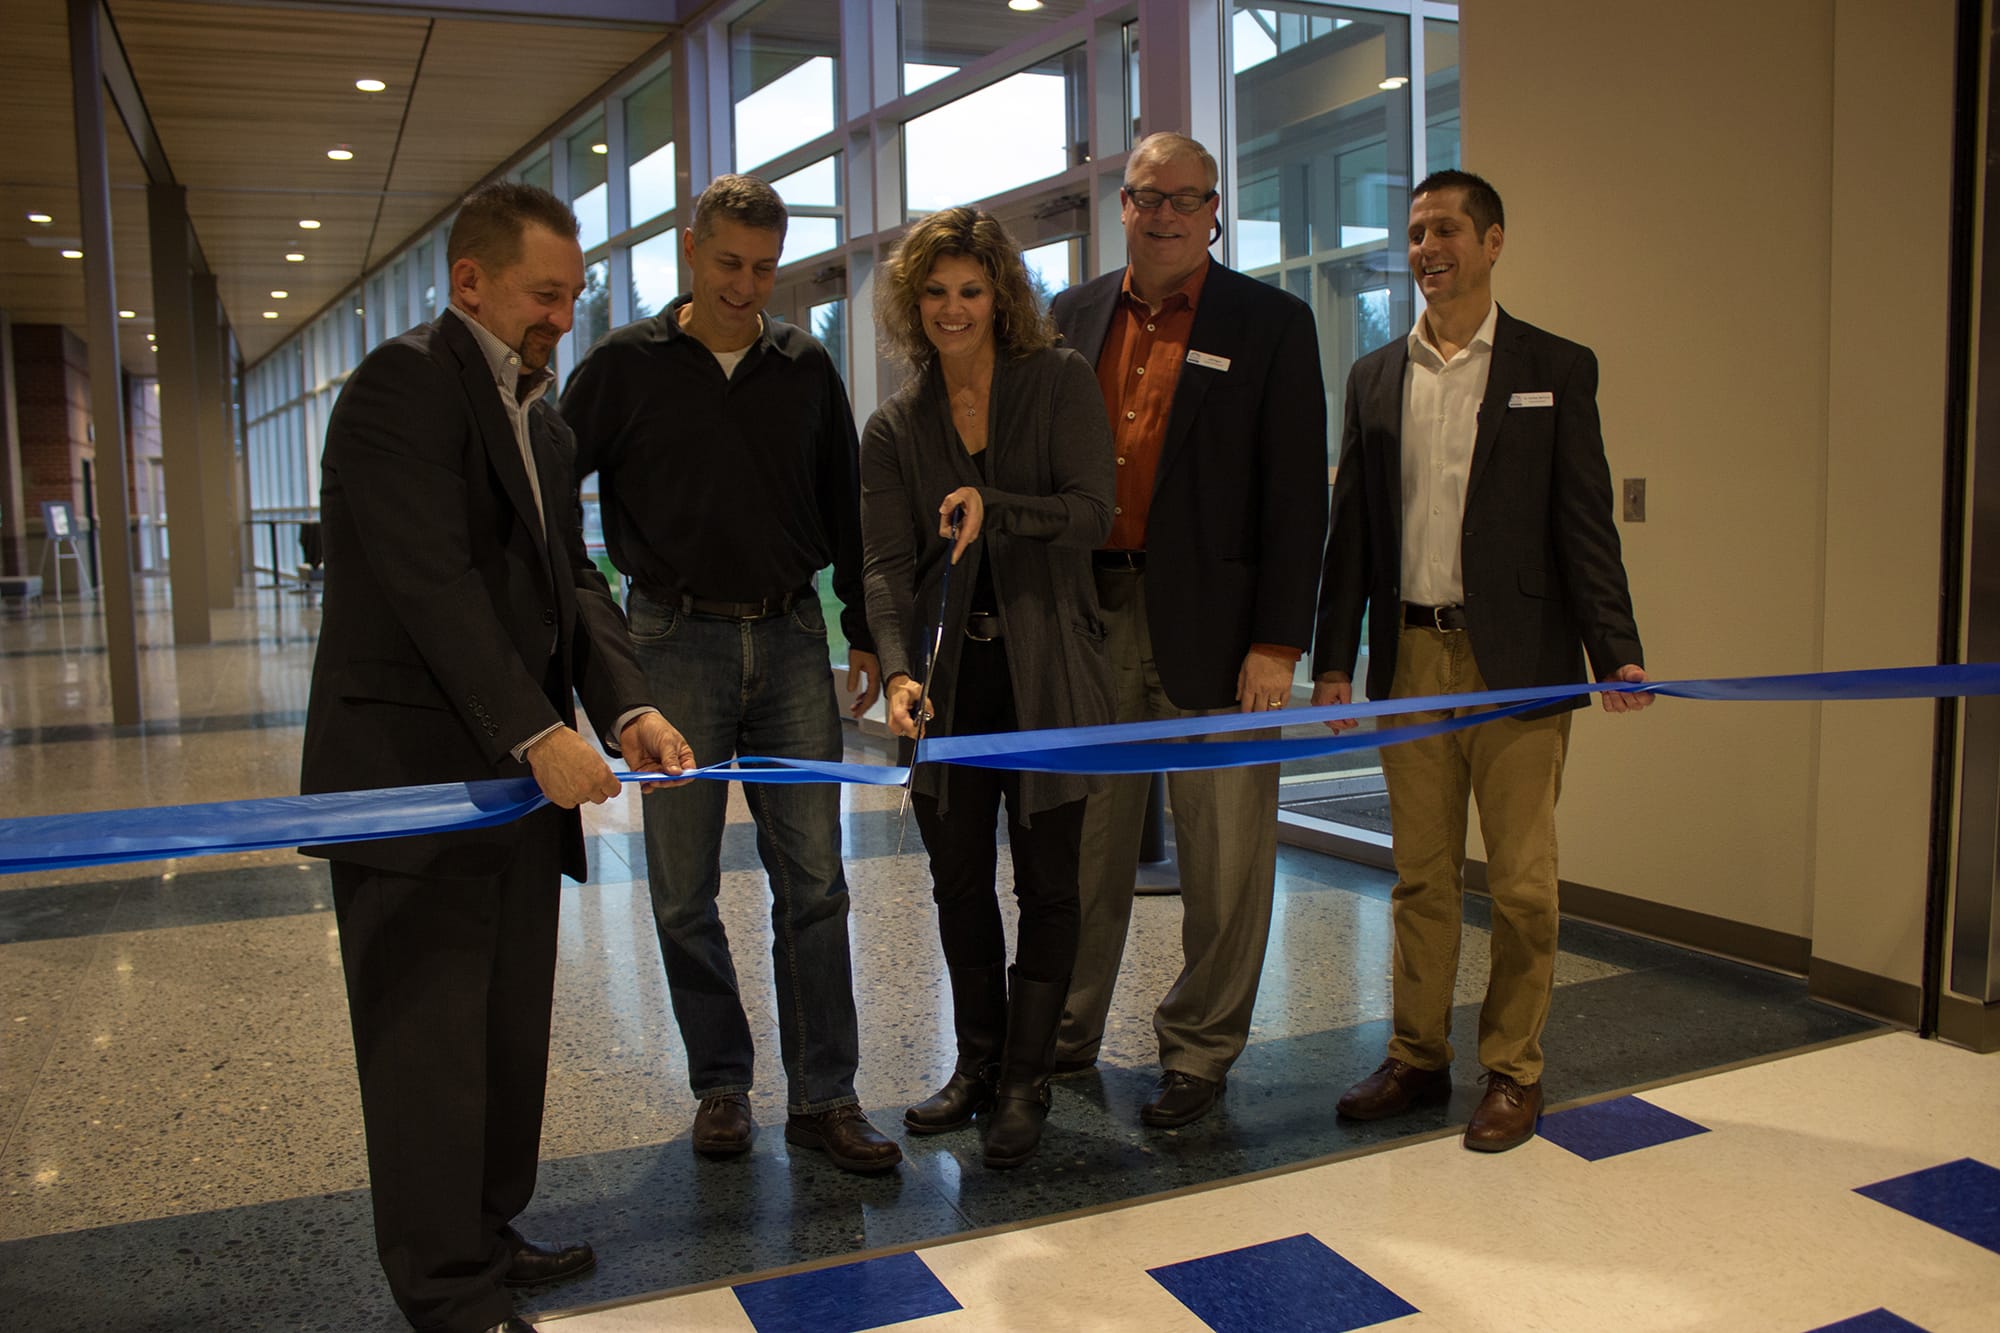 Ridgefield: Ridgefield School District board members Scott Gullickson, from left, Steve Radosevich, Becky Greenwald and Jeff Vigue cut a ribbon with Superintendent Nathan McCann at a Dec.